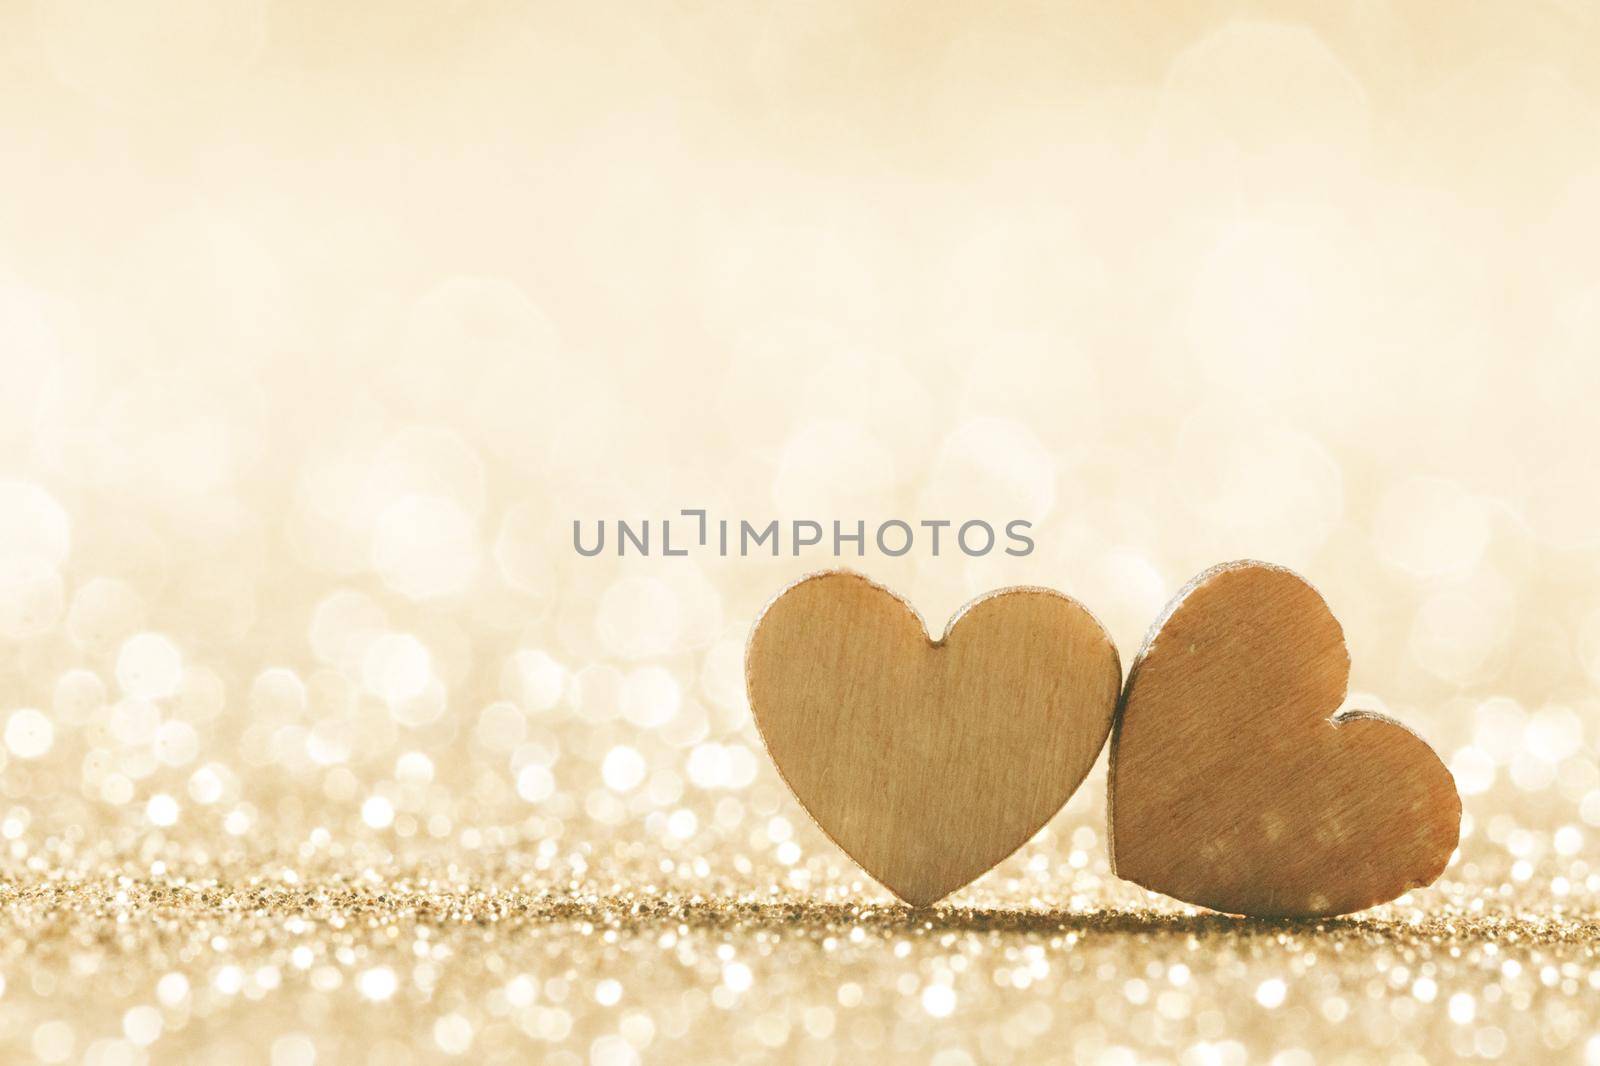 Two small handmade wooden hearts on bright golden lights bokeh background Valentines day card